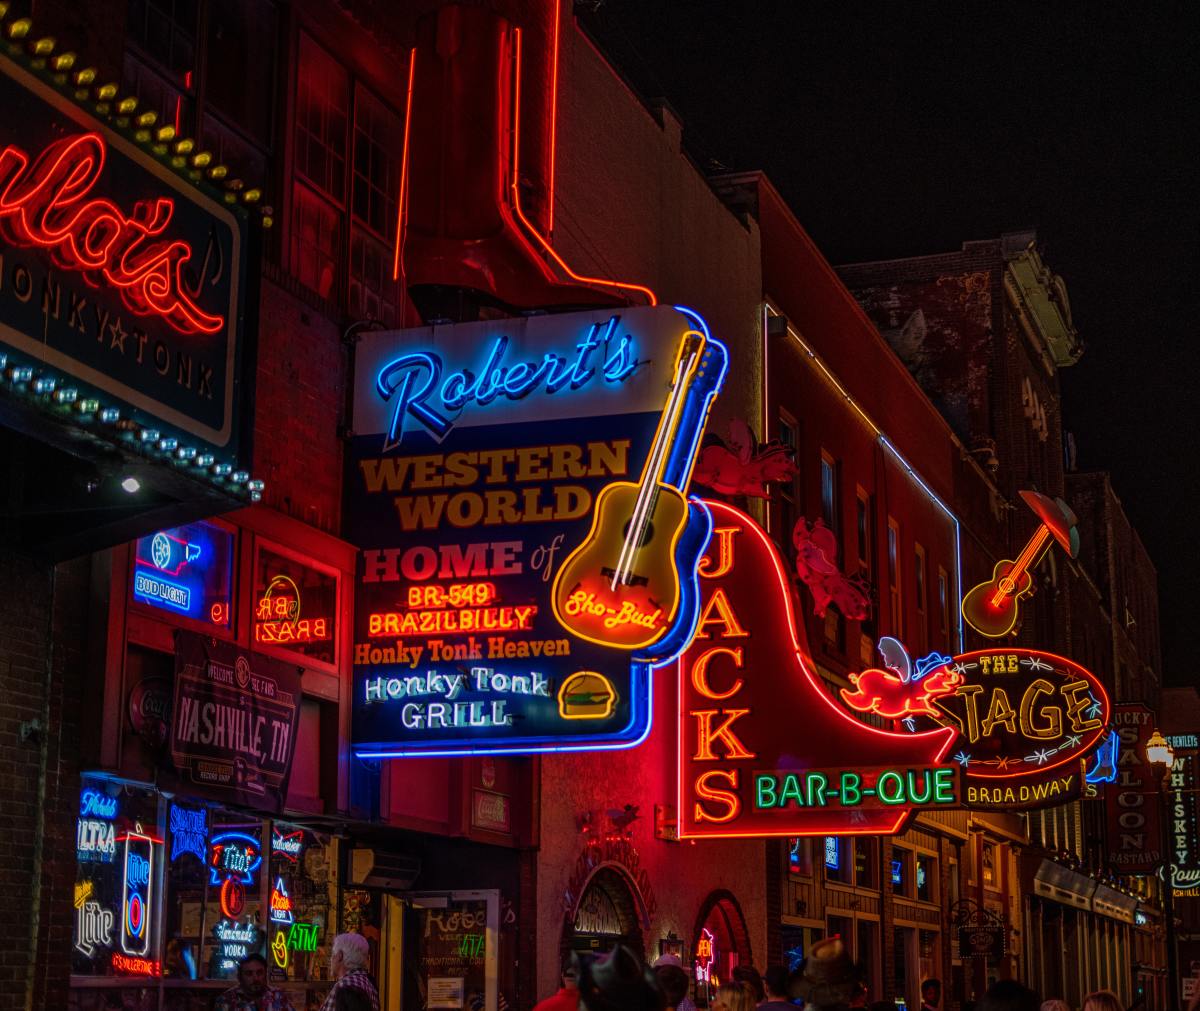 The honky-tonk bars found in every nook and cranny on Nashville's lower Broadway have long been drawing visitors from around the world.